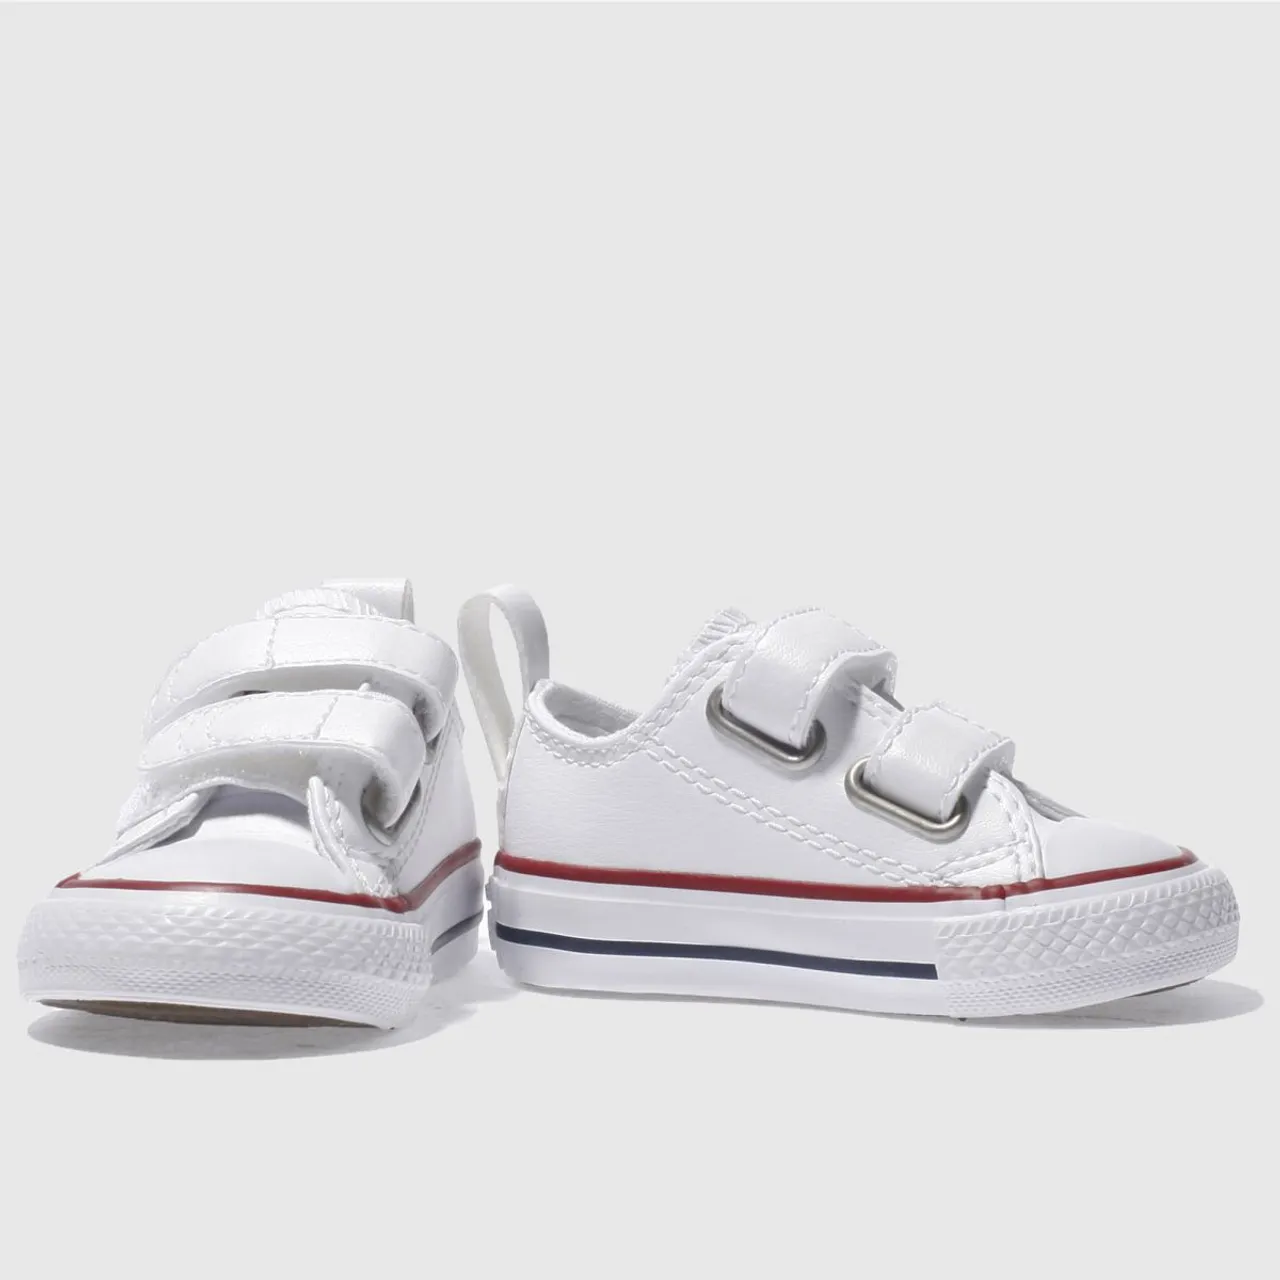 Converse White & Red All Star 2v Lo Toddler Trainers